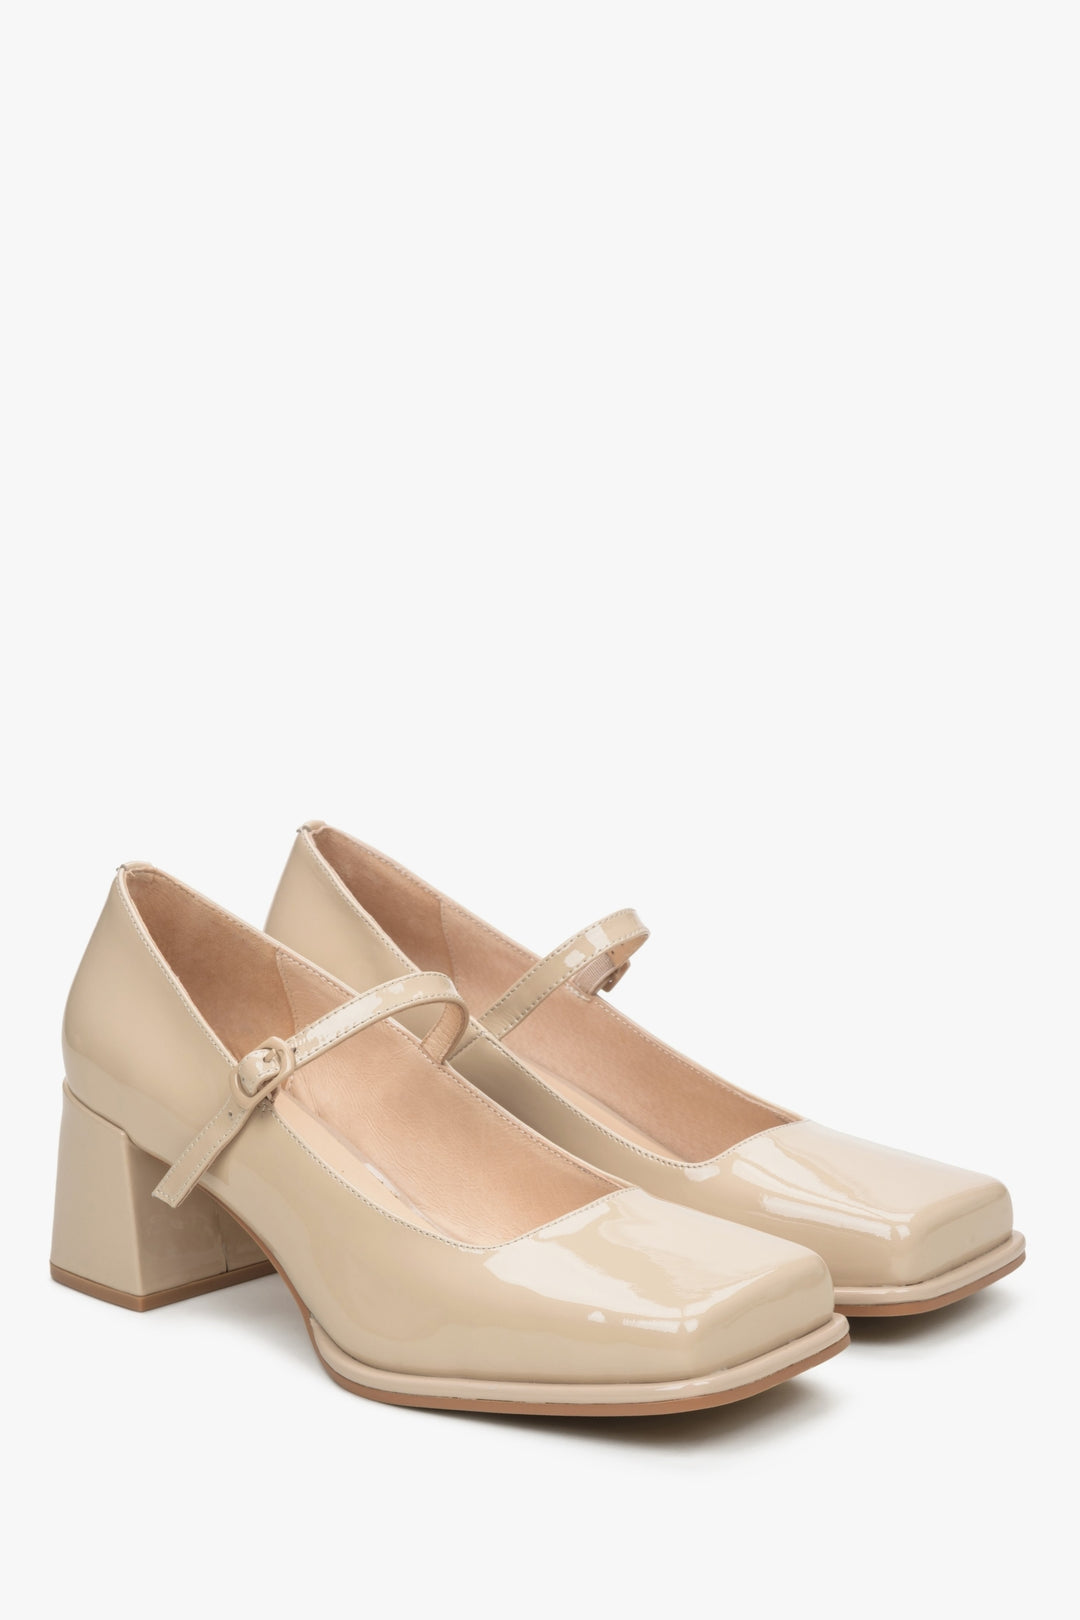 Women's Beige Mary Jane Pumps made of Genuine Patent Leather Estro ER00114678